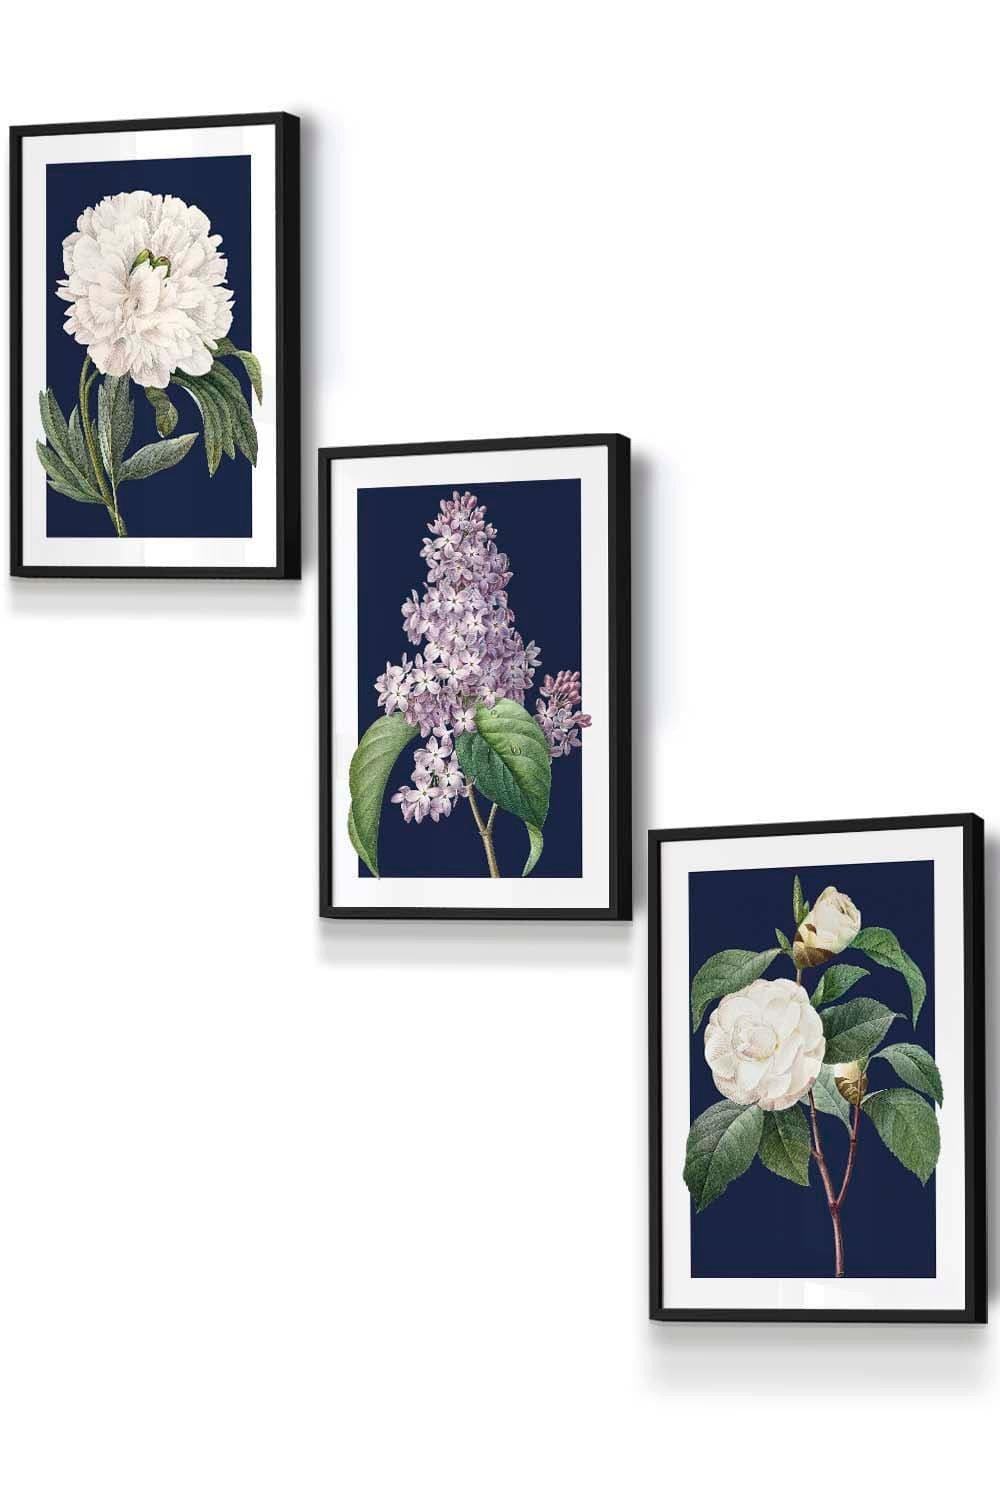 Set of 3 Black Framed Vintage Flowers Lilac, Peony and Camellia on Navy Blue Wall Art